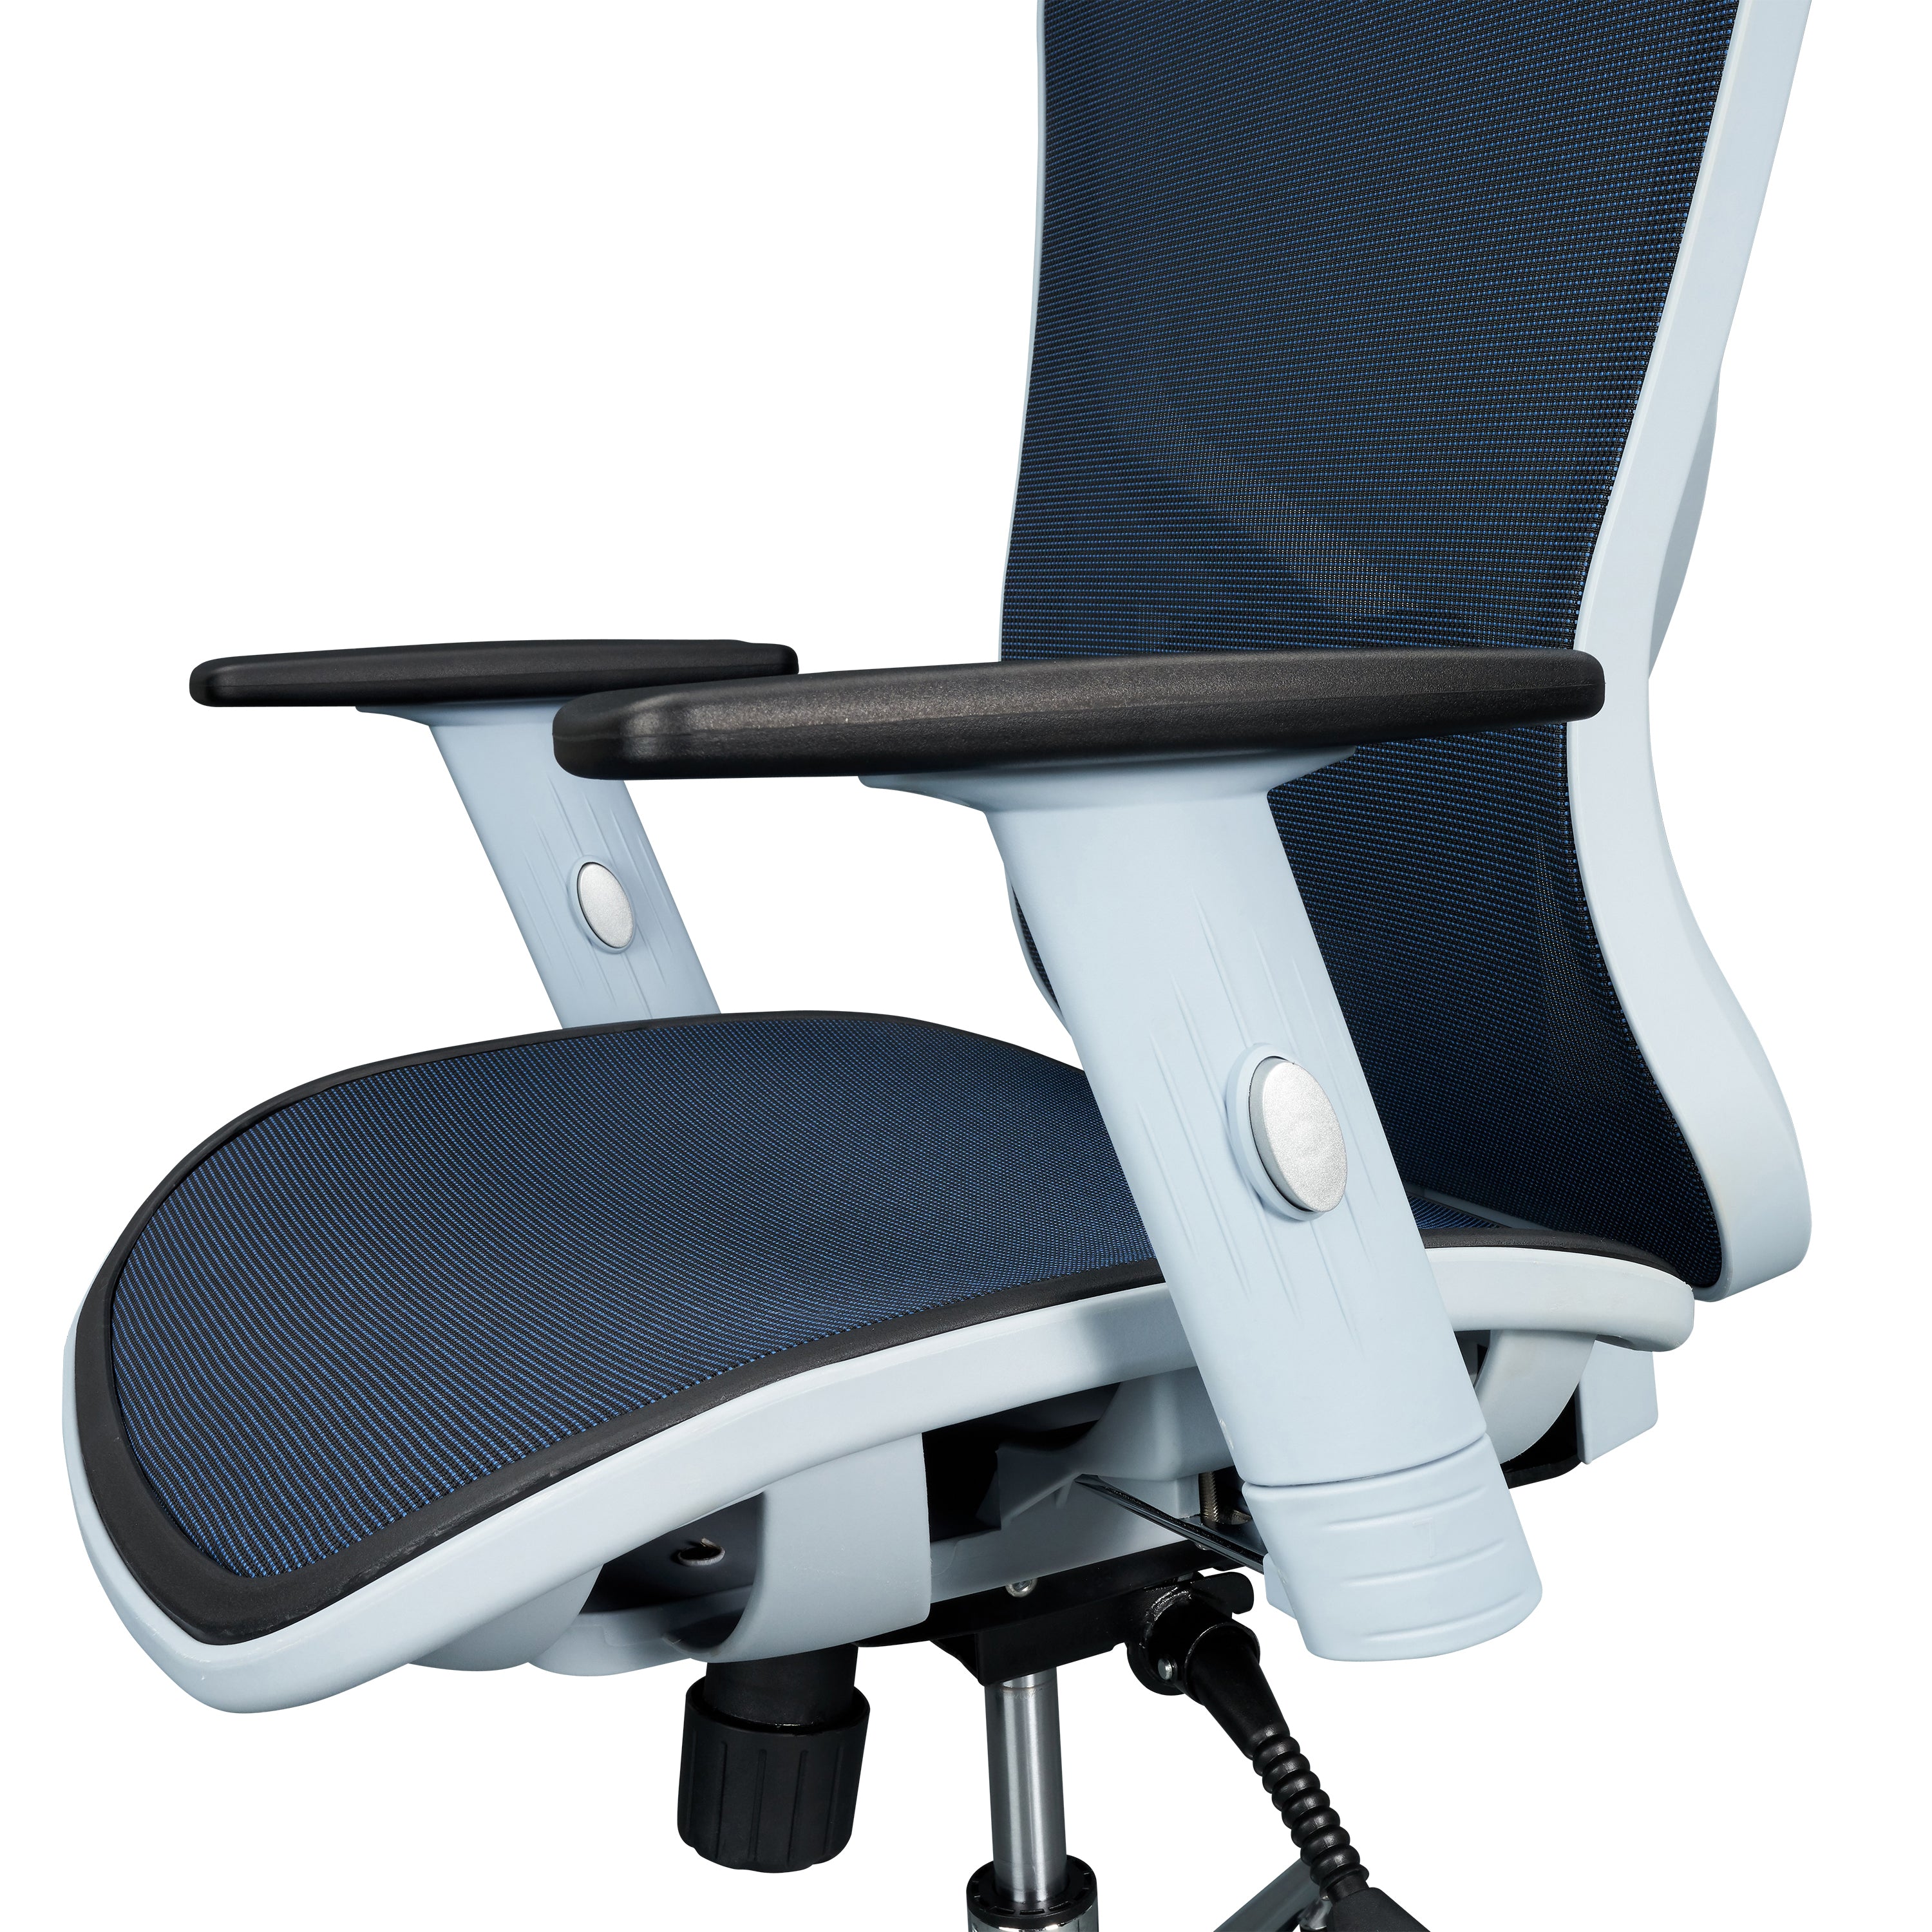 Modern High-Back Mesh Executive Office Chair With Headrest And Flip Up Arms